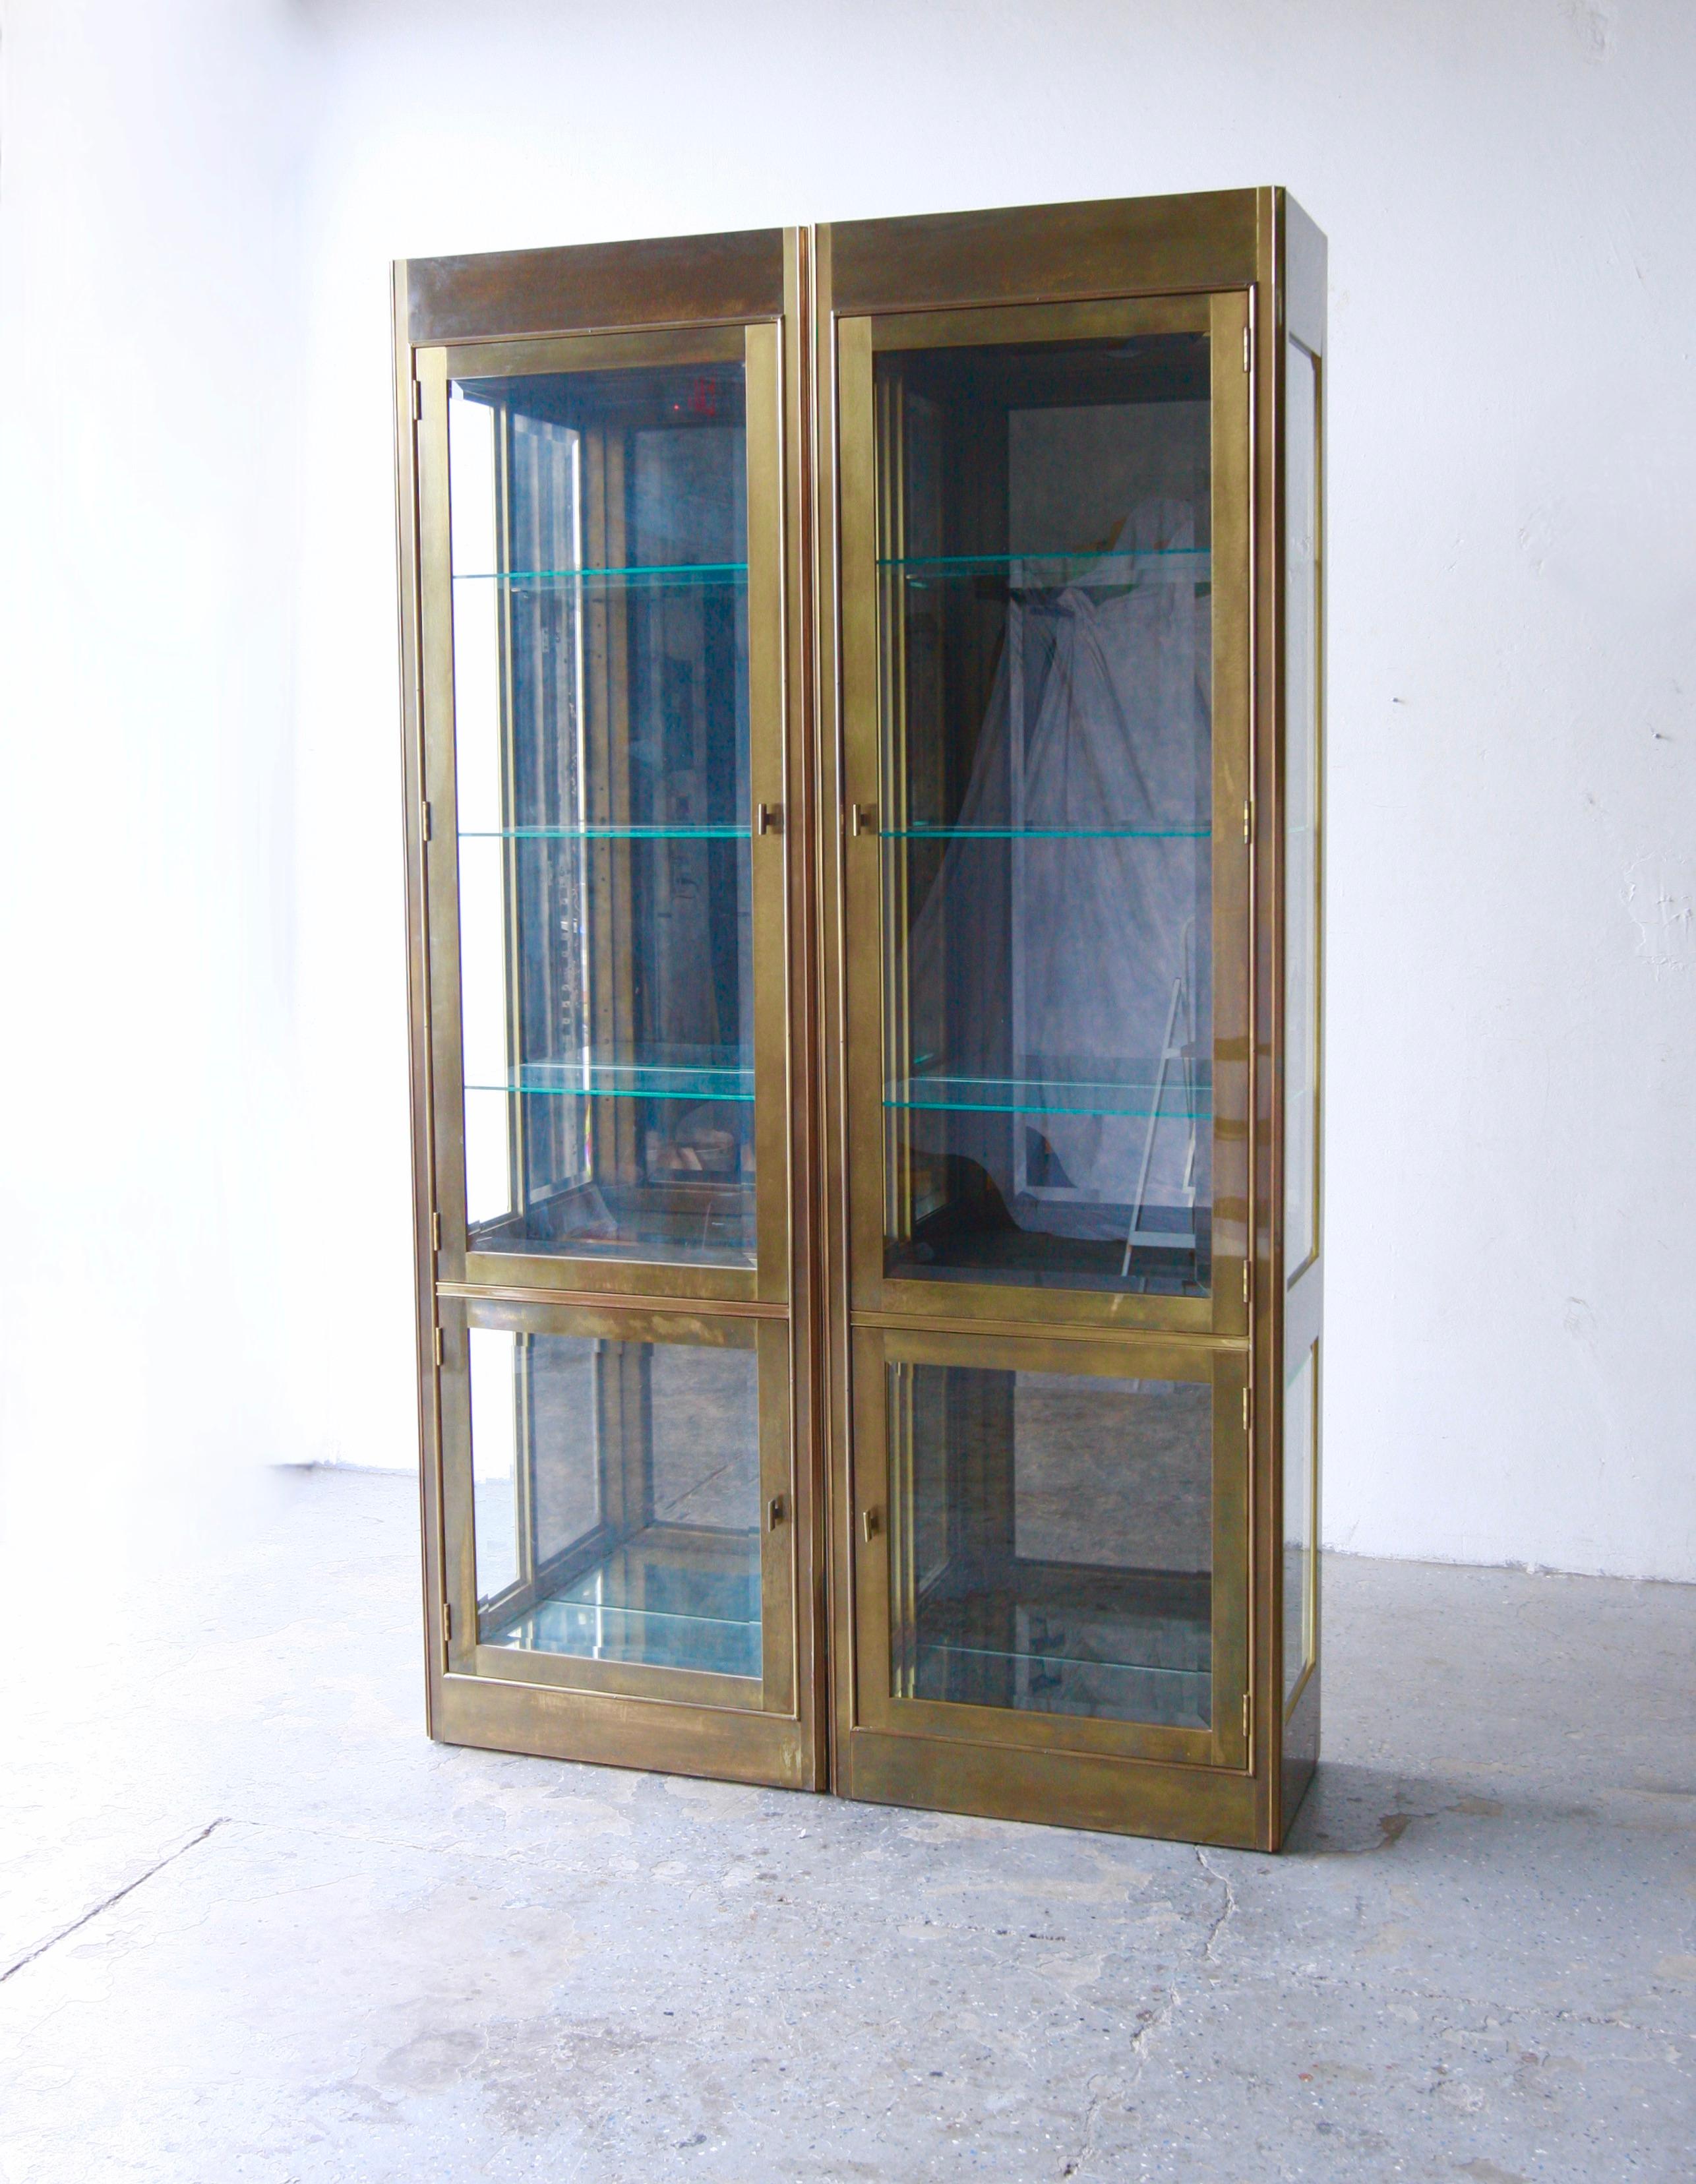 
Pair of aged Patina brass vitrines of impeccable quality from Mastercraft, circa 70s /80’s . Each Elegant brass-clad vitrine  opens to reveal  adjustable glass shelves with a plate ridge for displaying plates or other flat items. The glass cabinet